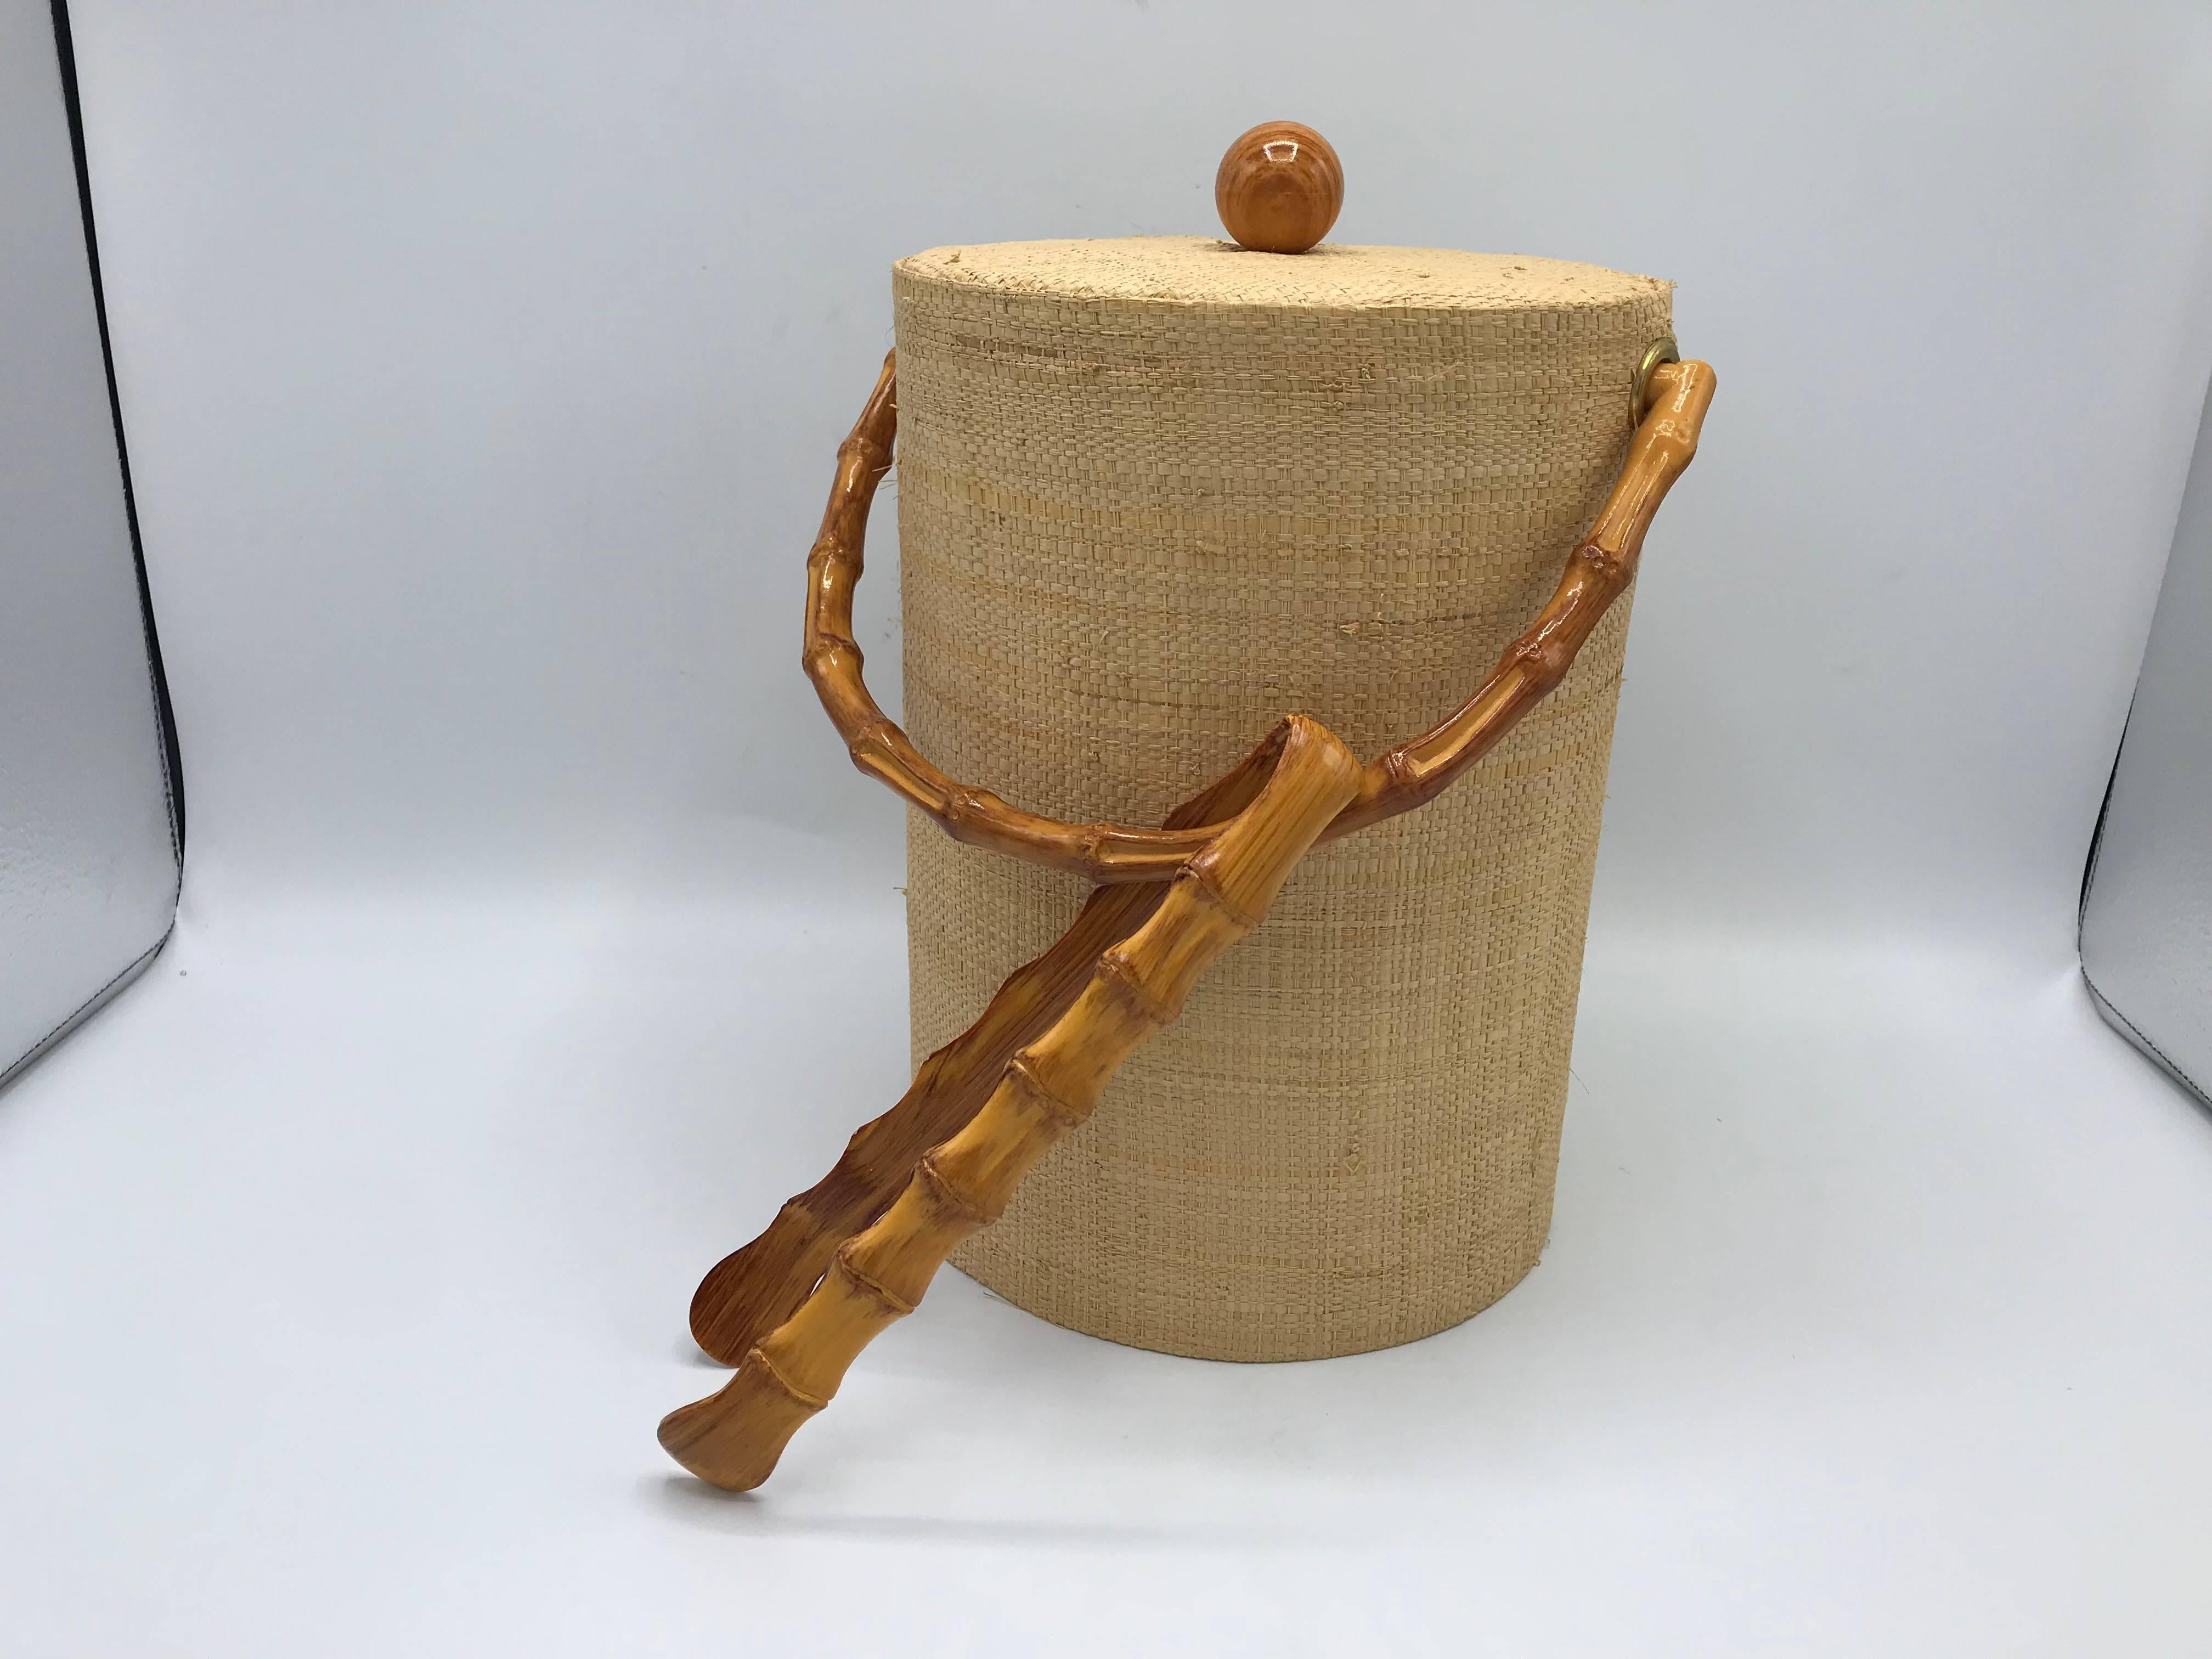 Offered is a fabulous, 1980s raffia wrapped ice bucket with a faux bamboo handle and matching faux bamboo tongs. The perfect addition to any Chinoiserie cocktail hour! Plastic liner. Excellent, never used condition.